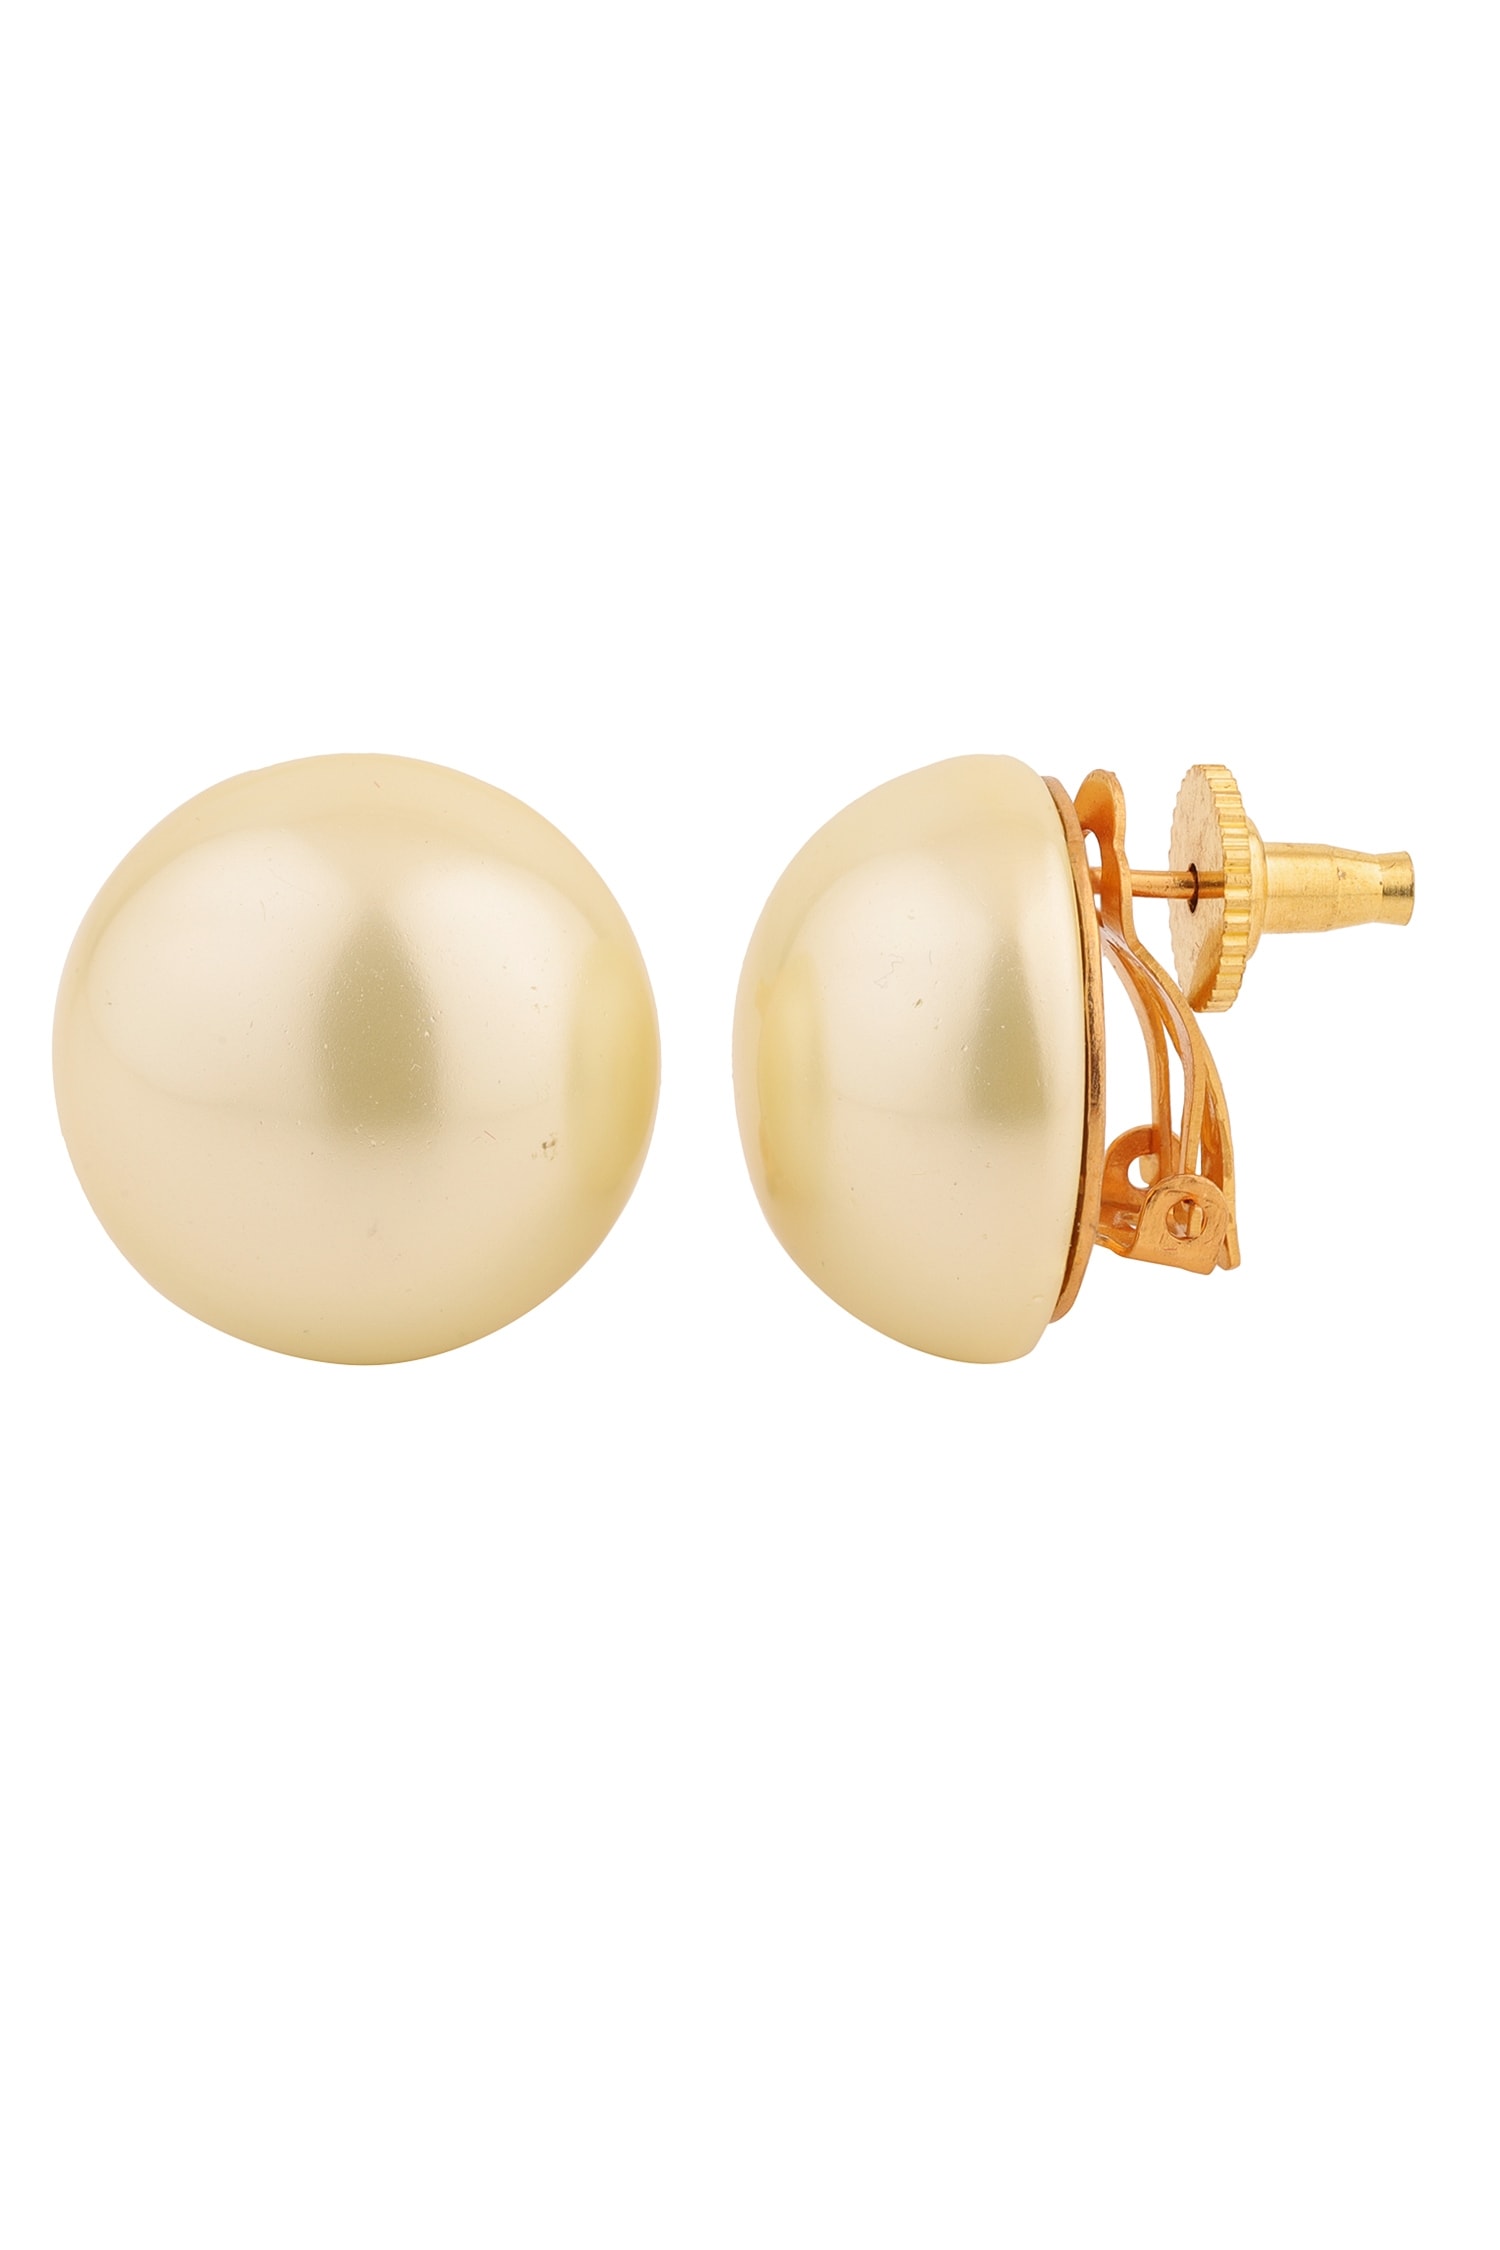 The Pearl Story  20 mm Ivory White Shell Pearl Studs  Curio Cottage